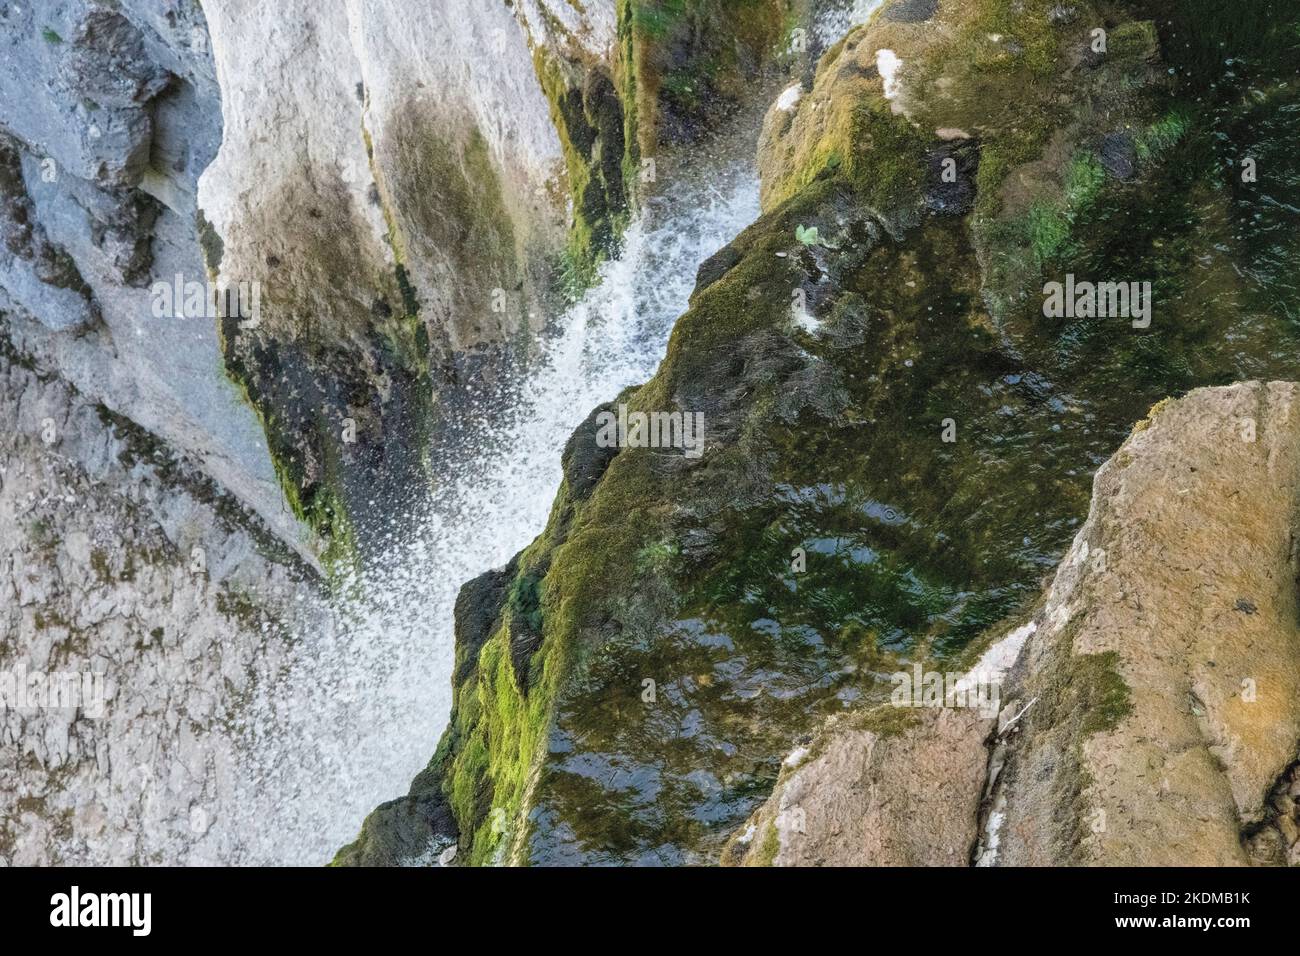 Waterfall seen from above Stock Photo